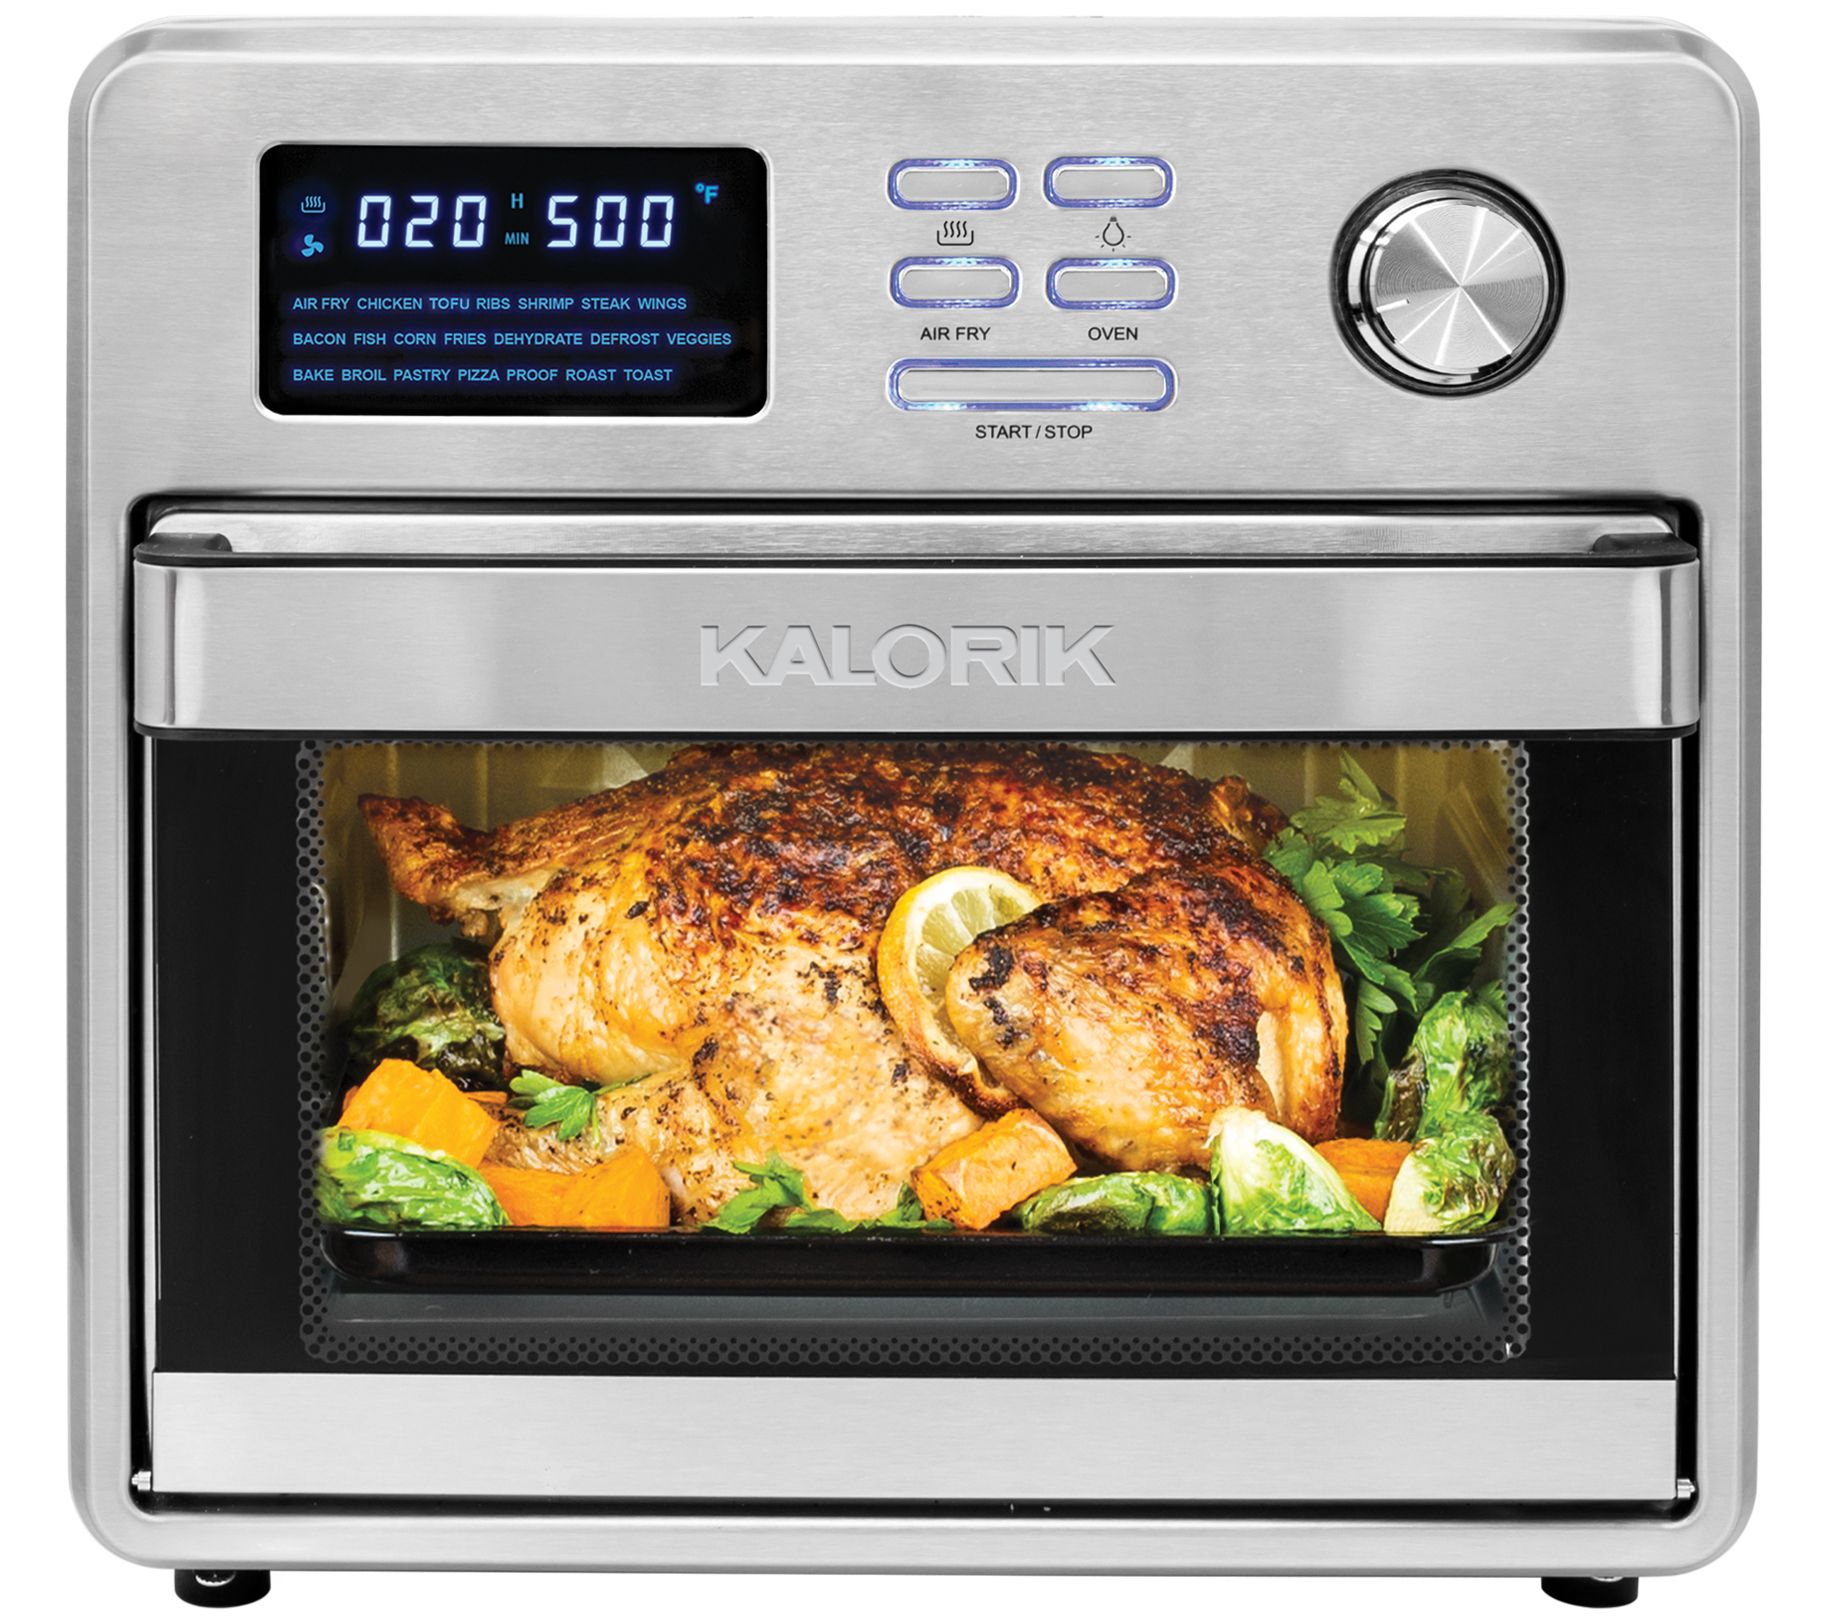 Livenza Large Air Fryer Oven - Stainless Steel